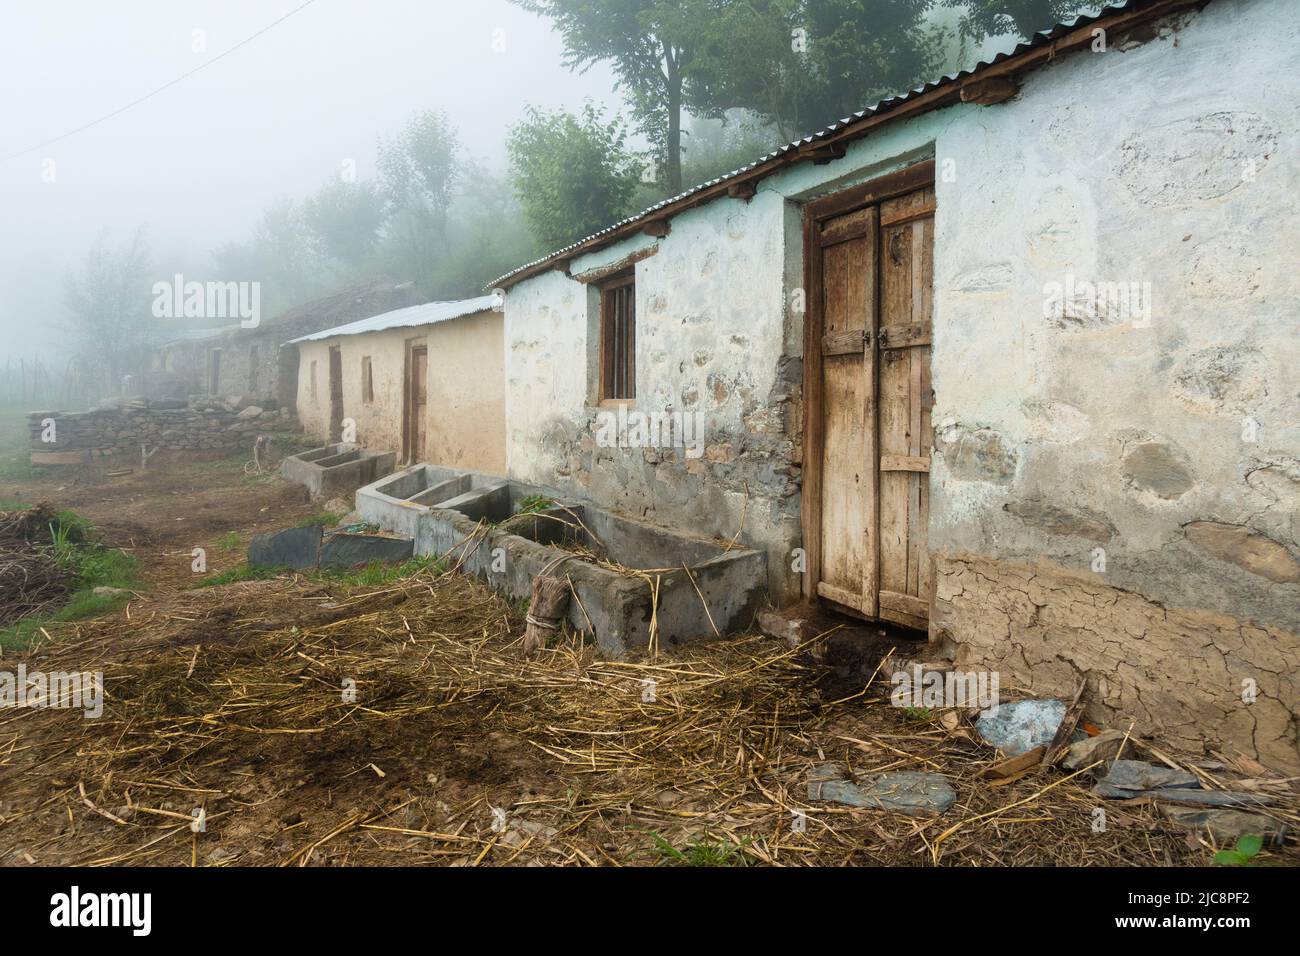 Domestic cattle house and feed troughs for cattle in rural India of the himalayan region. Uttarakhand India. Stock Photo